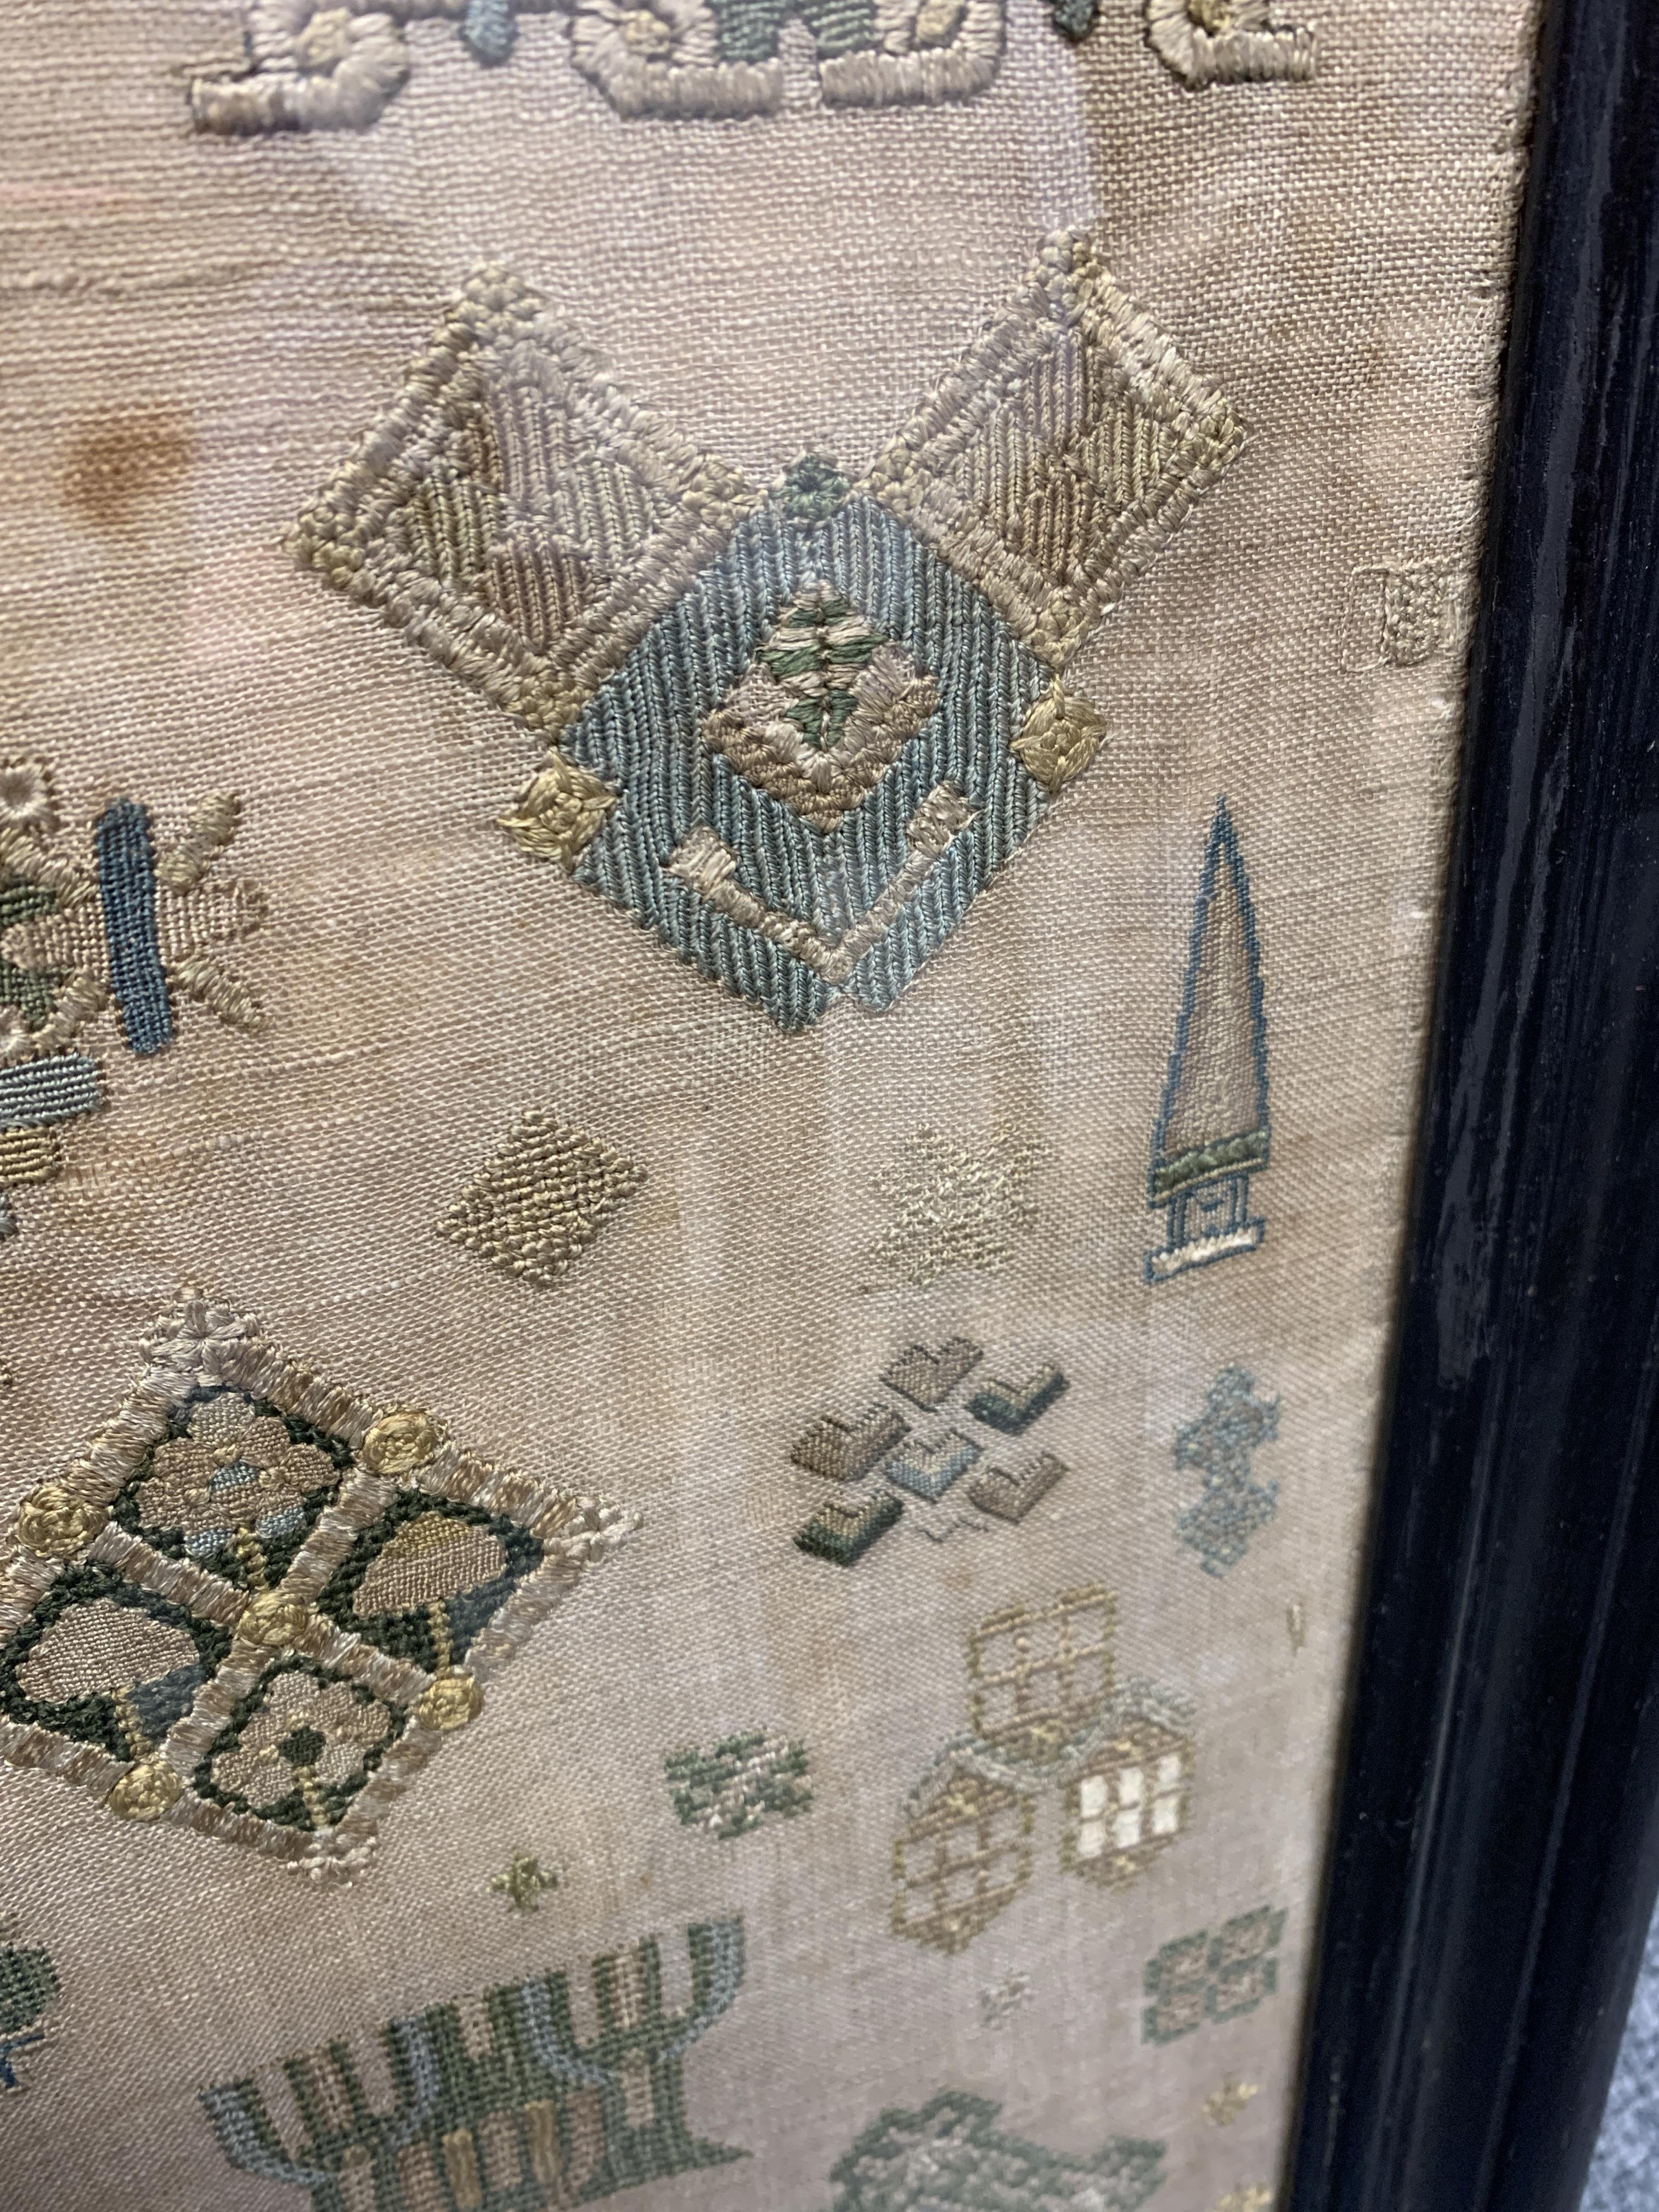 A RARE NEEDLEWORK SPOT SAMPLER BY GRACE THRUSTON, MID-17TH CENTURY worked with polychrome silks on - Image 7 of 15